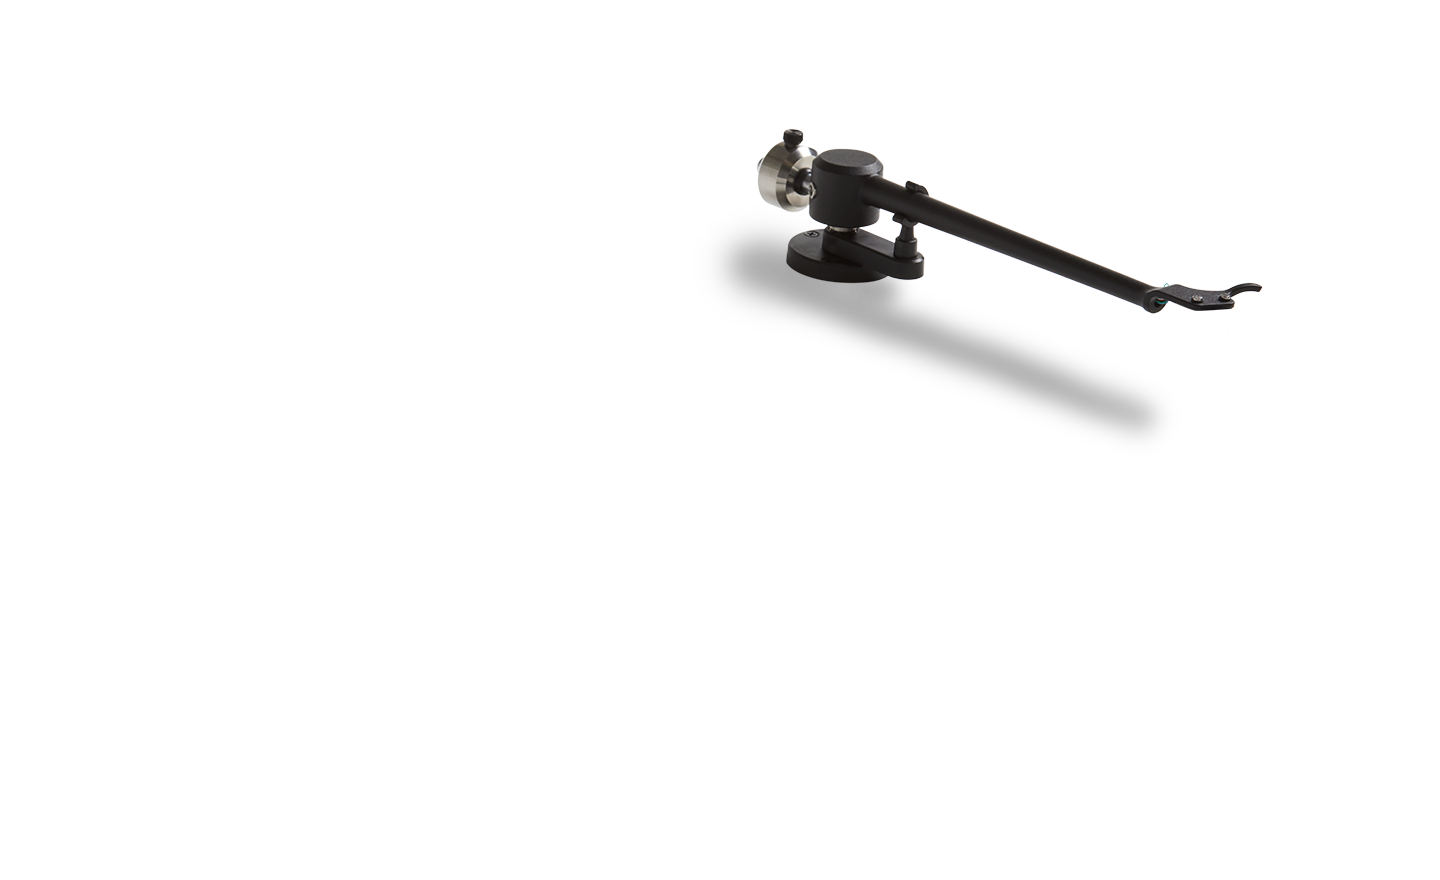 Tonearm without cue lever